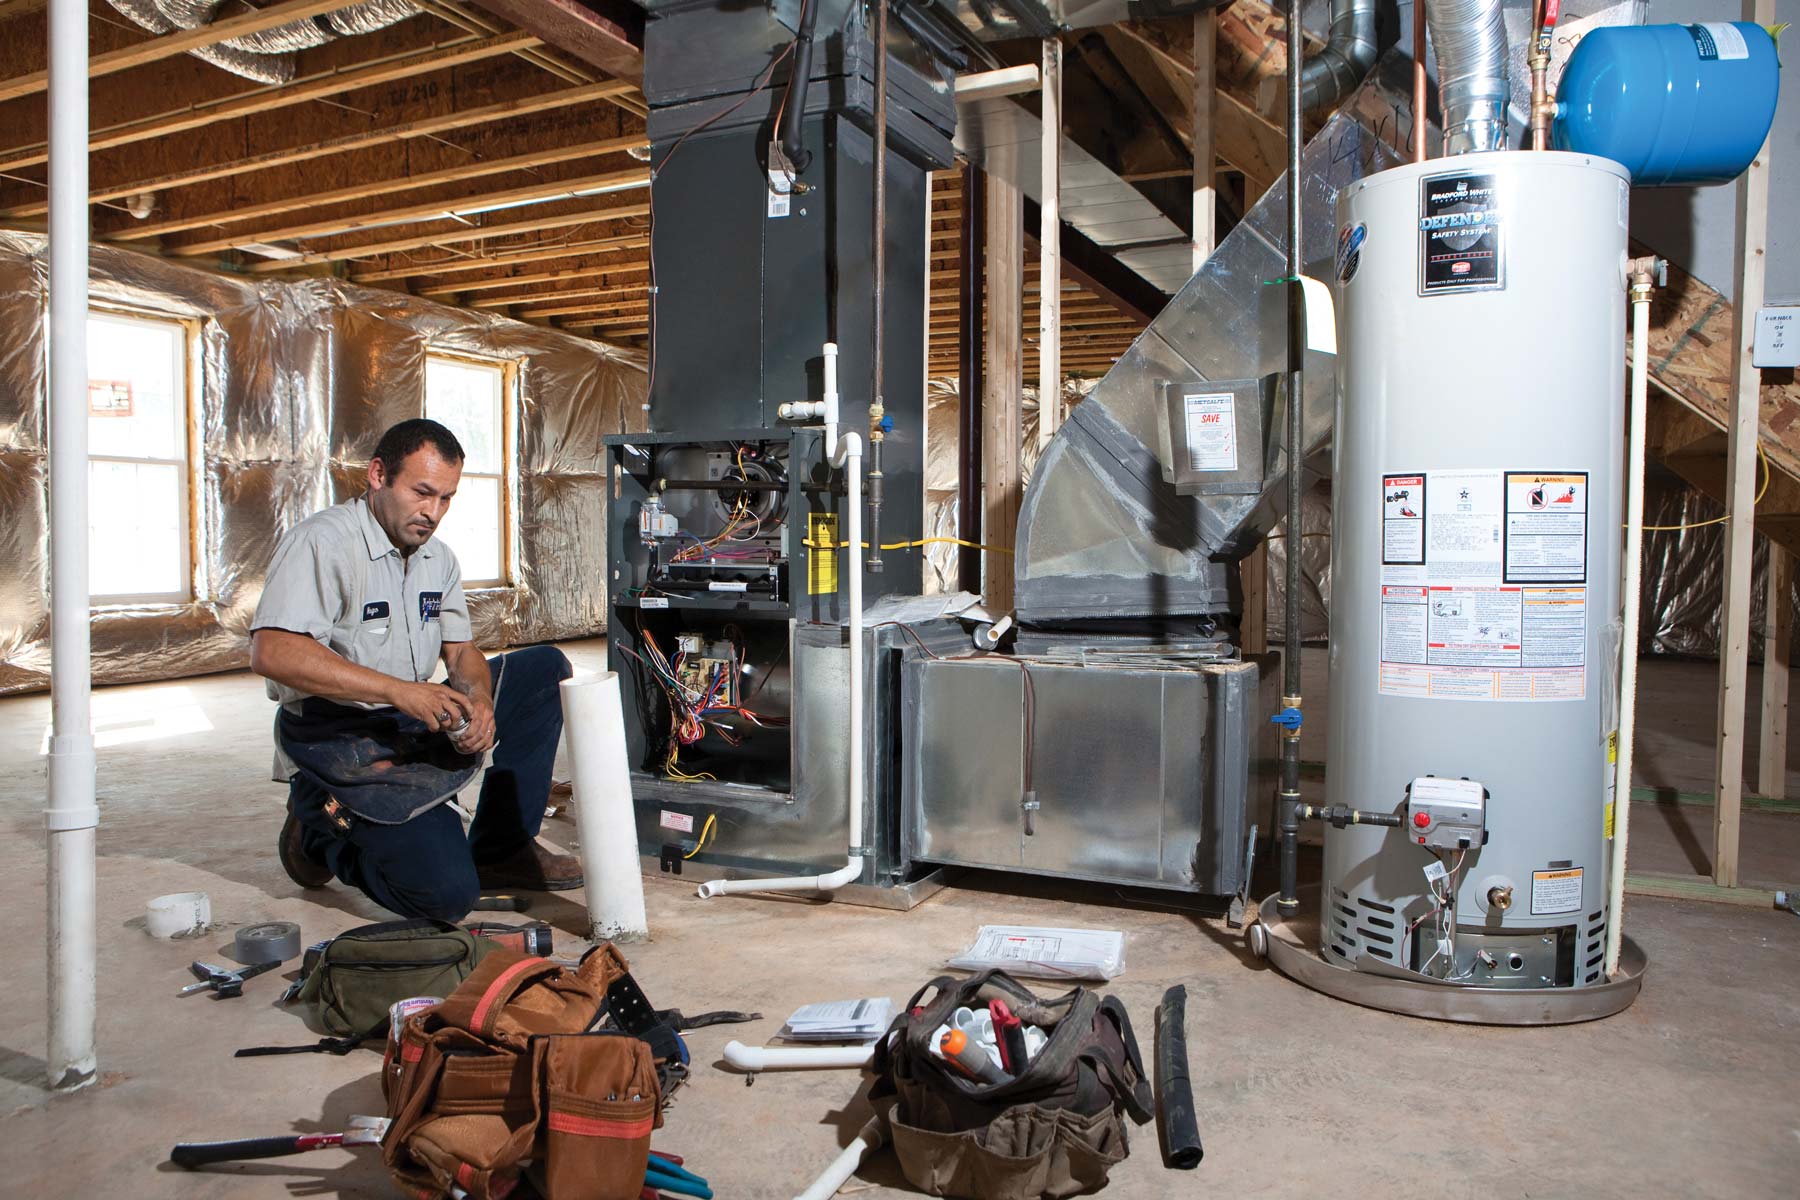 Getting a New Propane Furnace - What to Expect